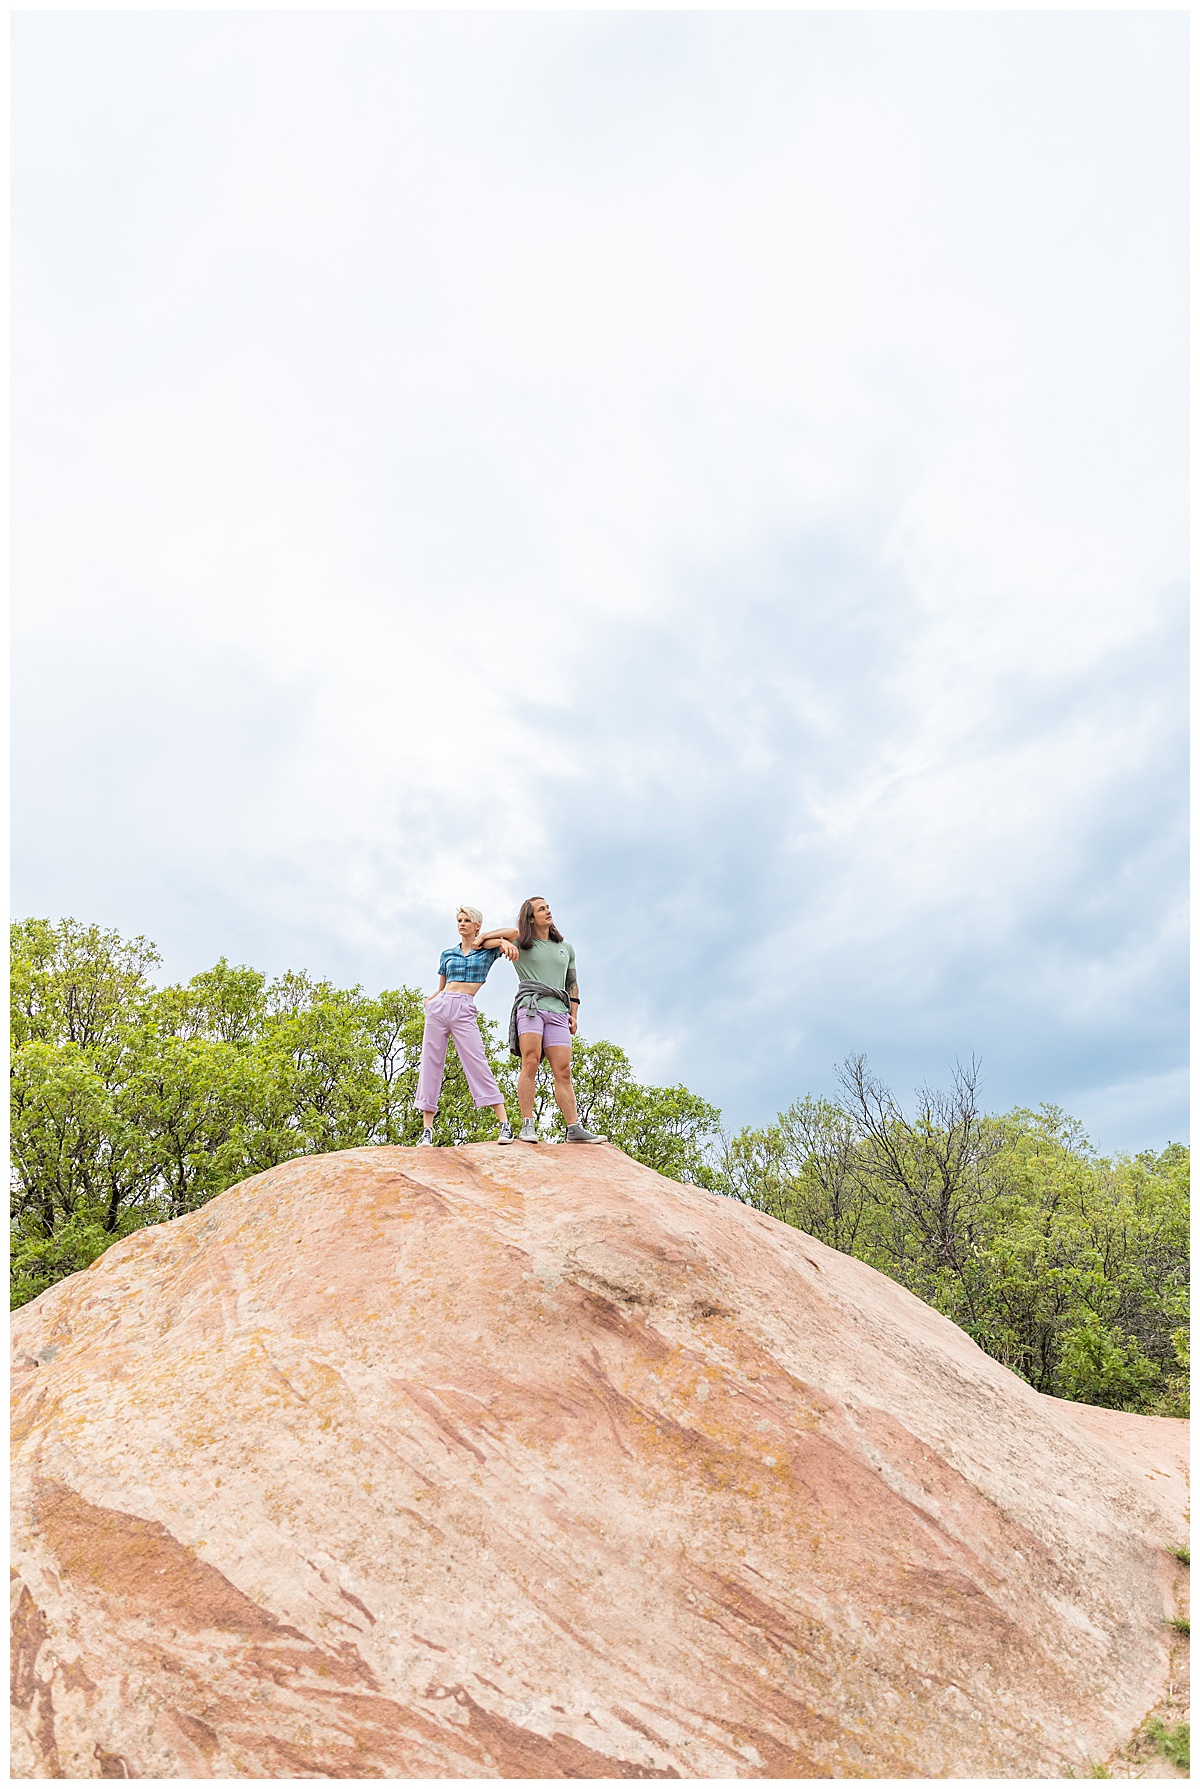 A couple dressed in purple, blue, and green pose on top of a large red rock